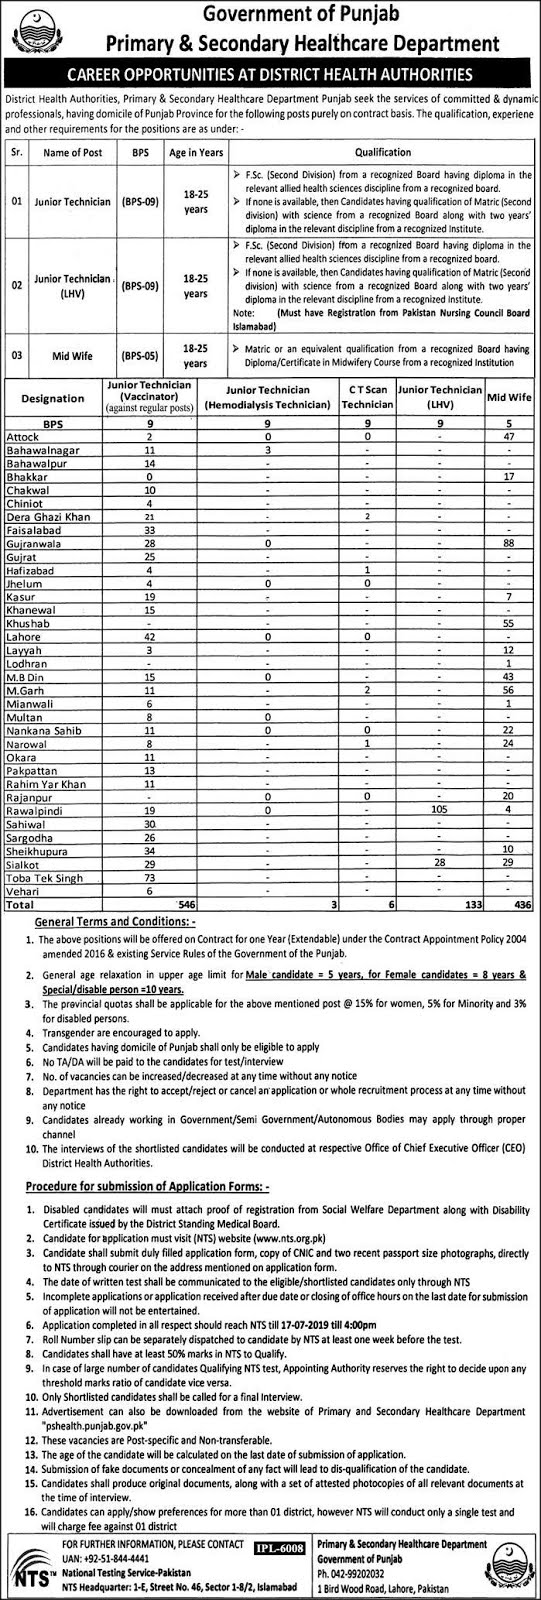 jobs in primary and secondary healthcare department 2019,primary and secondary healthcare department jobs,primary and secondary healthcare department punjab jobs 2019,healthcare department jobs 2019,health department jobs 2019,primary and secondary healthcare department punjab,healthcare department jobs,jobs in health department 2019,primary and secondary healthcare department jobs 2019